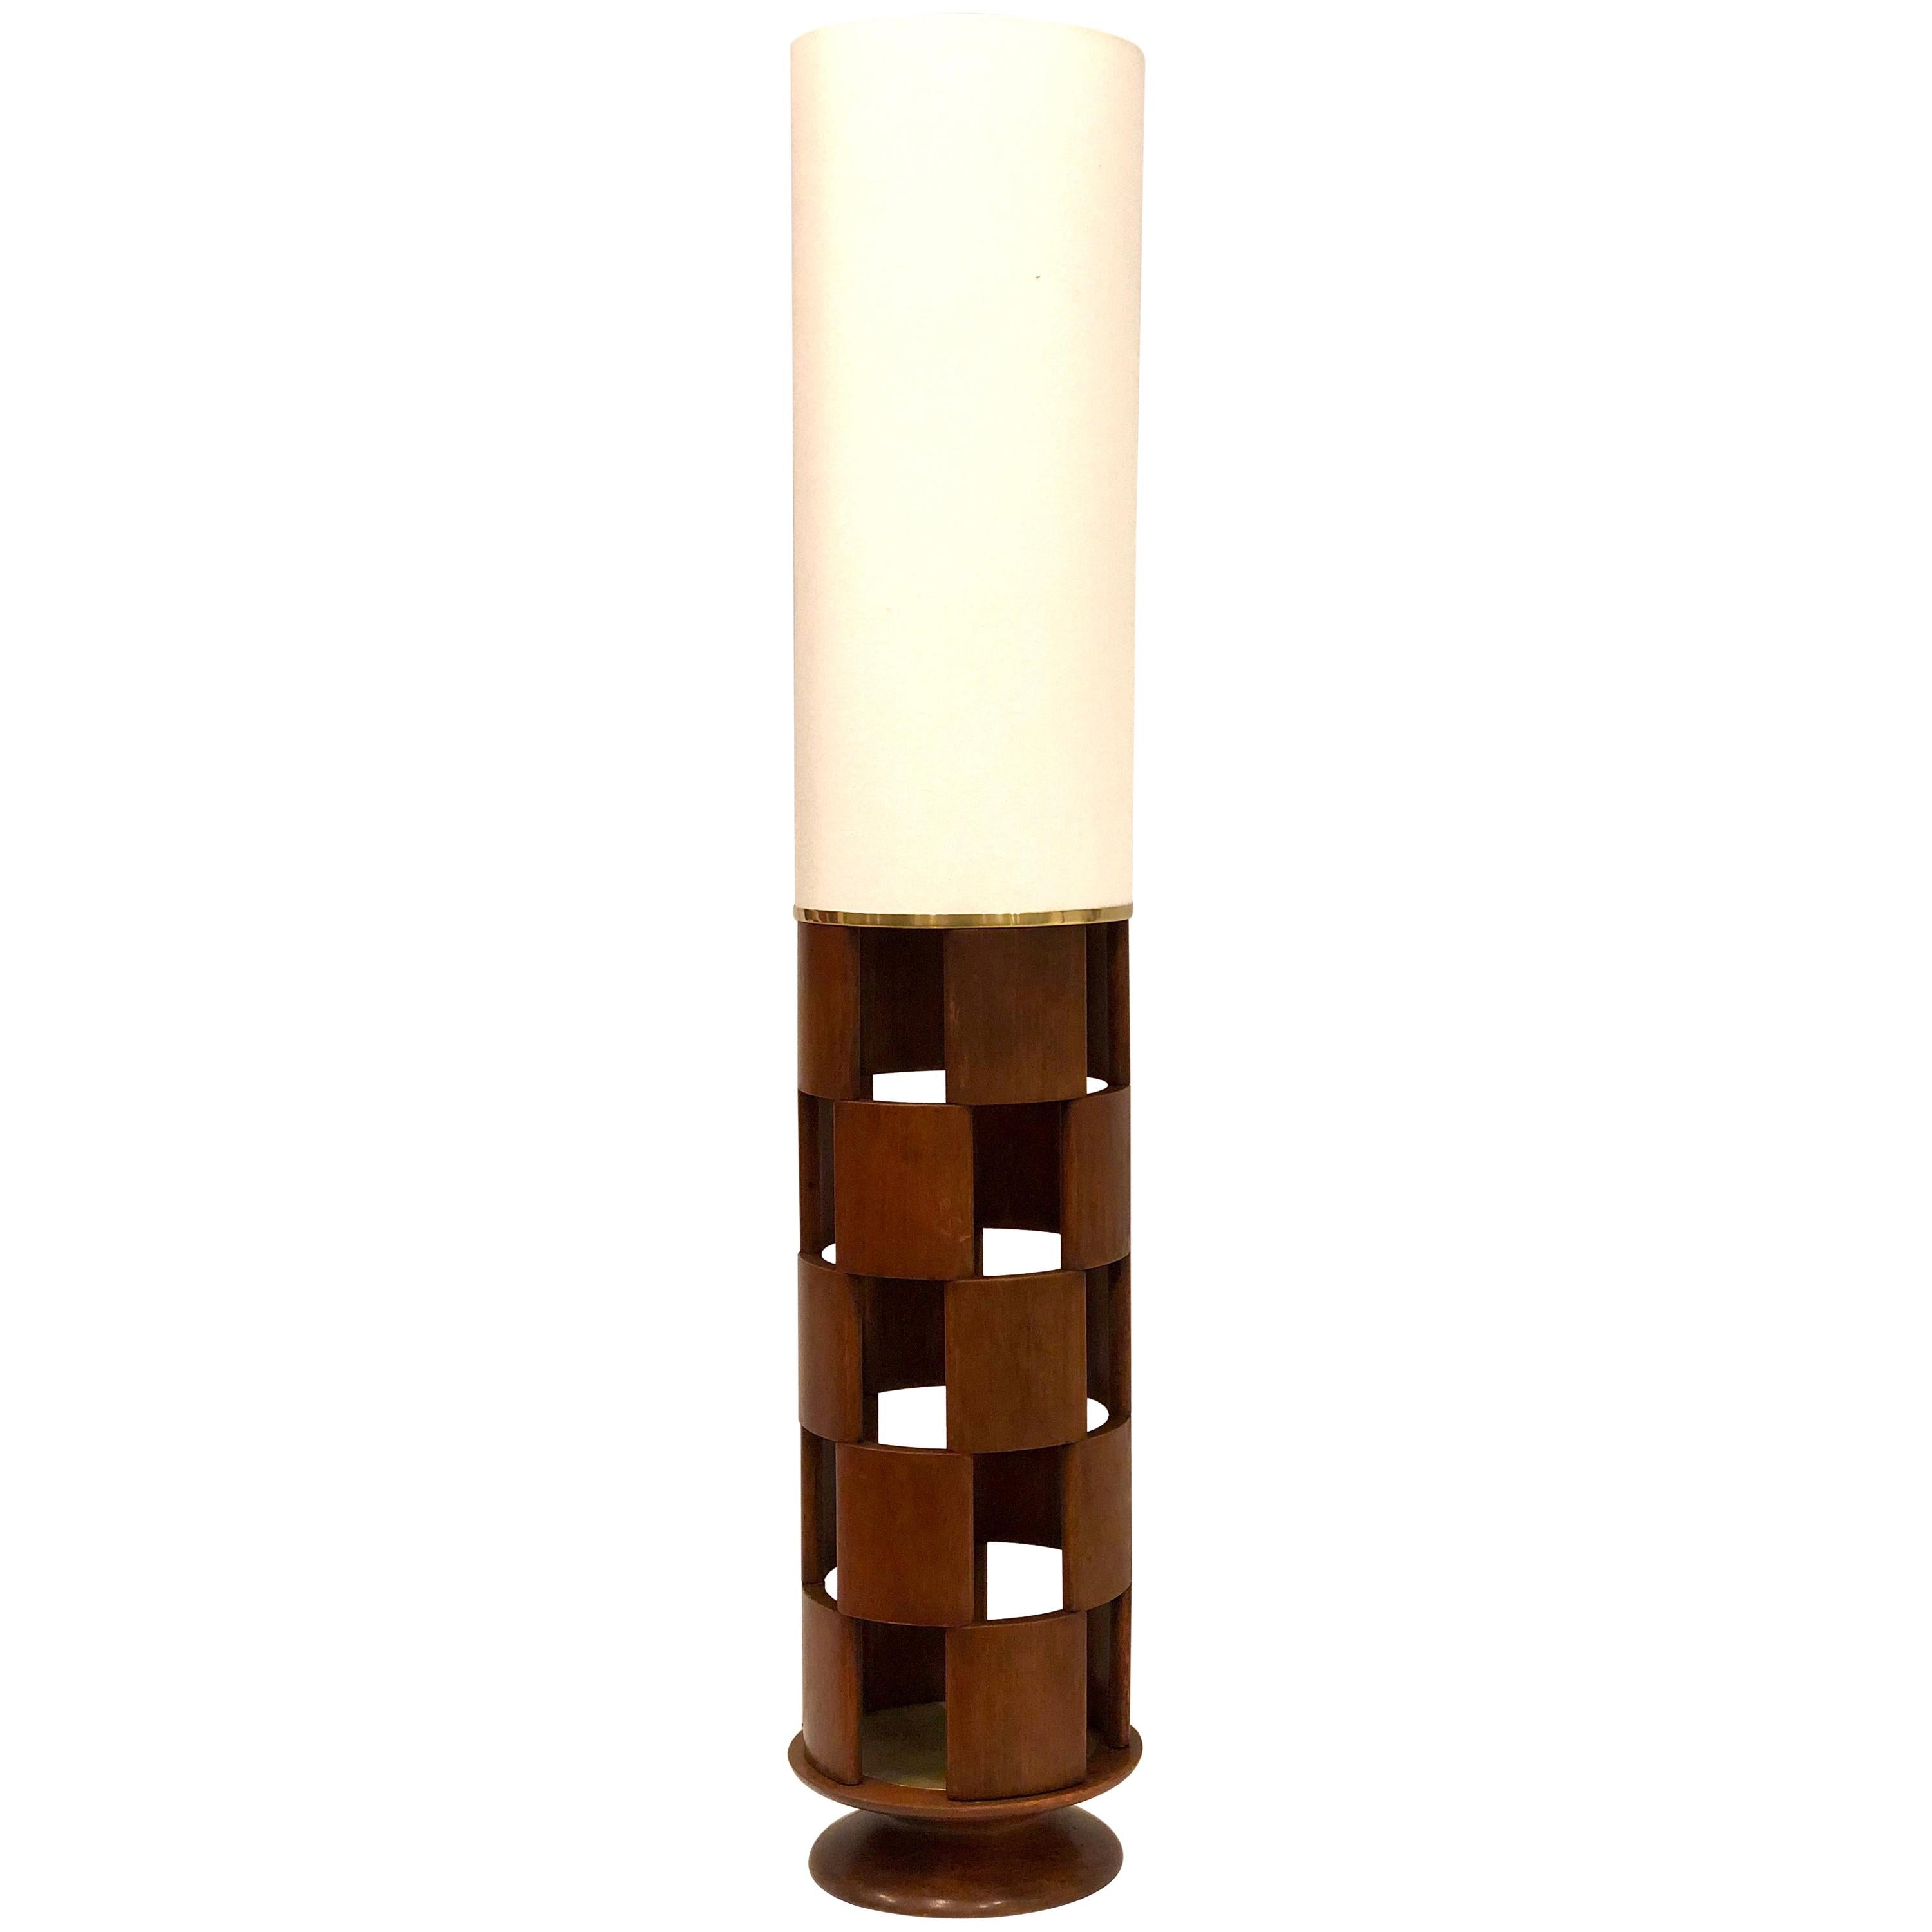 American Mid-Century Modern Tall Lamp by Modeline Lamp Company